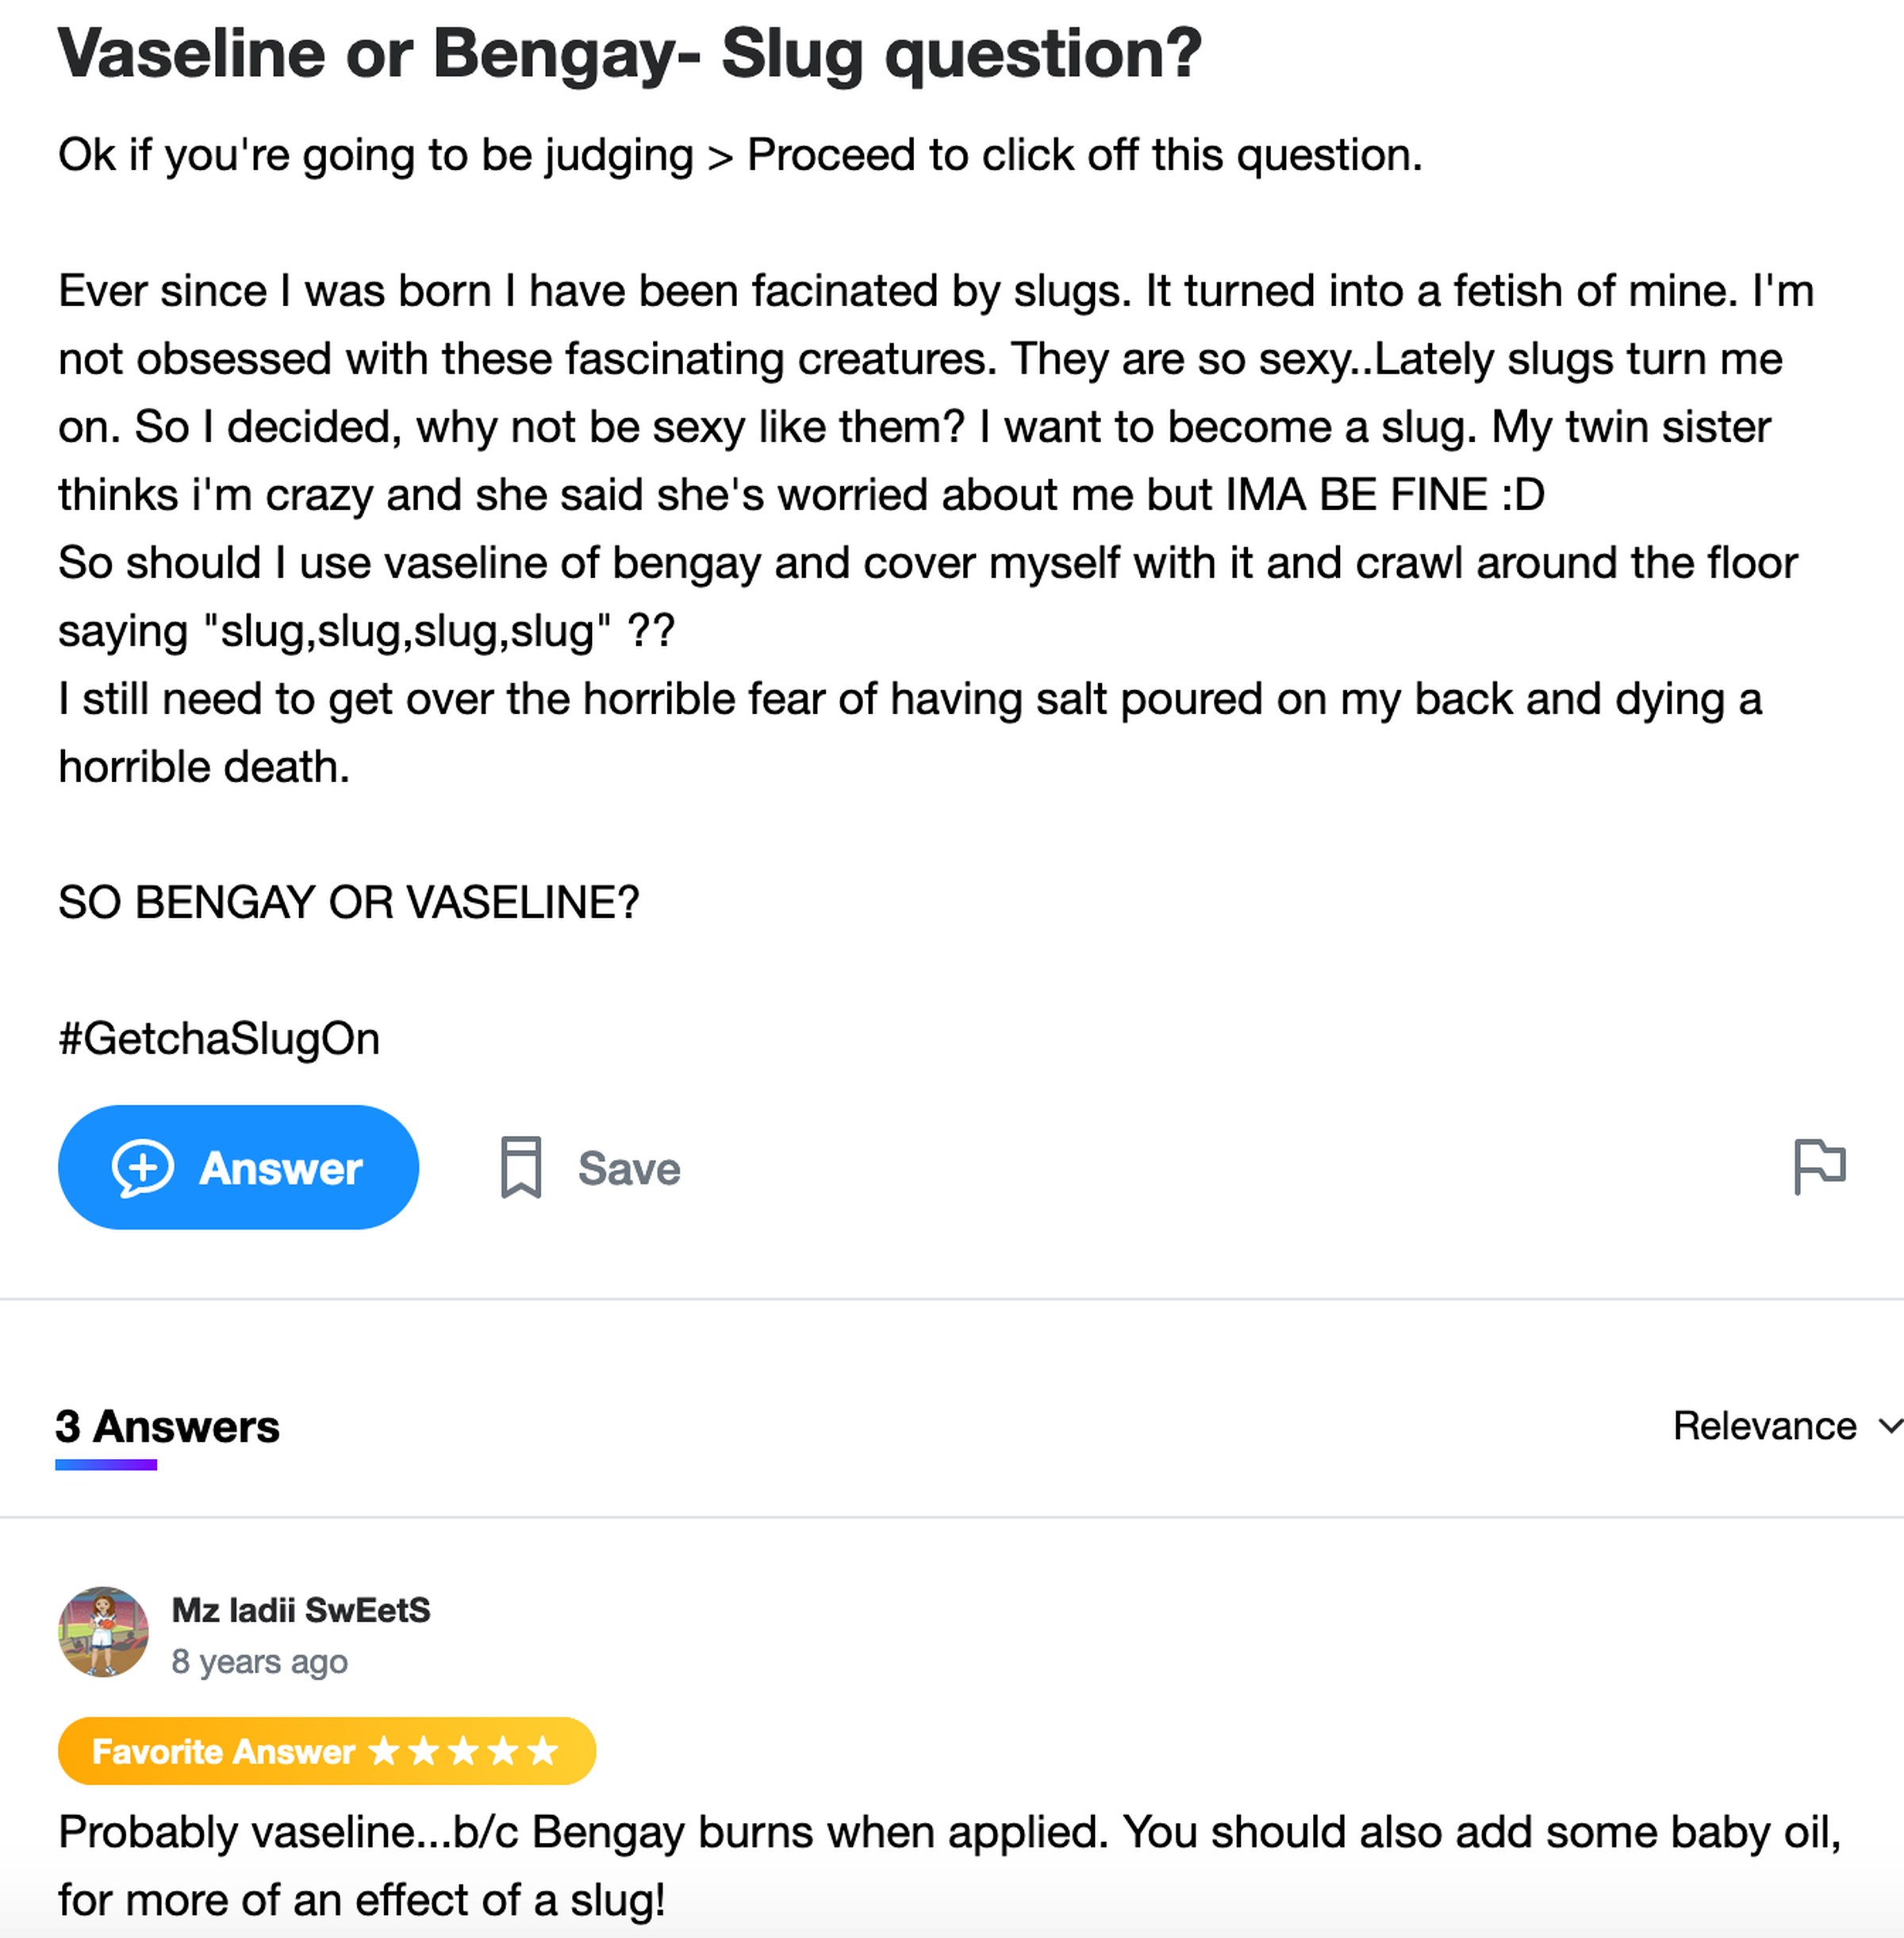 Yahoo Answers post: Ever since I was born I have been facinated by slugs. It turned into a fetish of mine. They are so sexy..Lately slugs turn me on. So I decided, why not be sexy like them? I want to become a slug. So should I use vaseline of bengay and cover myself with it and crawl around the floor saying “slug,slug,slug,slug” ?? I still need to get over the horrible fear of having salt poured on my back and dying a horrible death. SO BENGAY OR VASELINE?